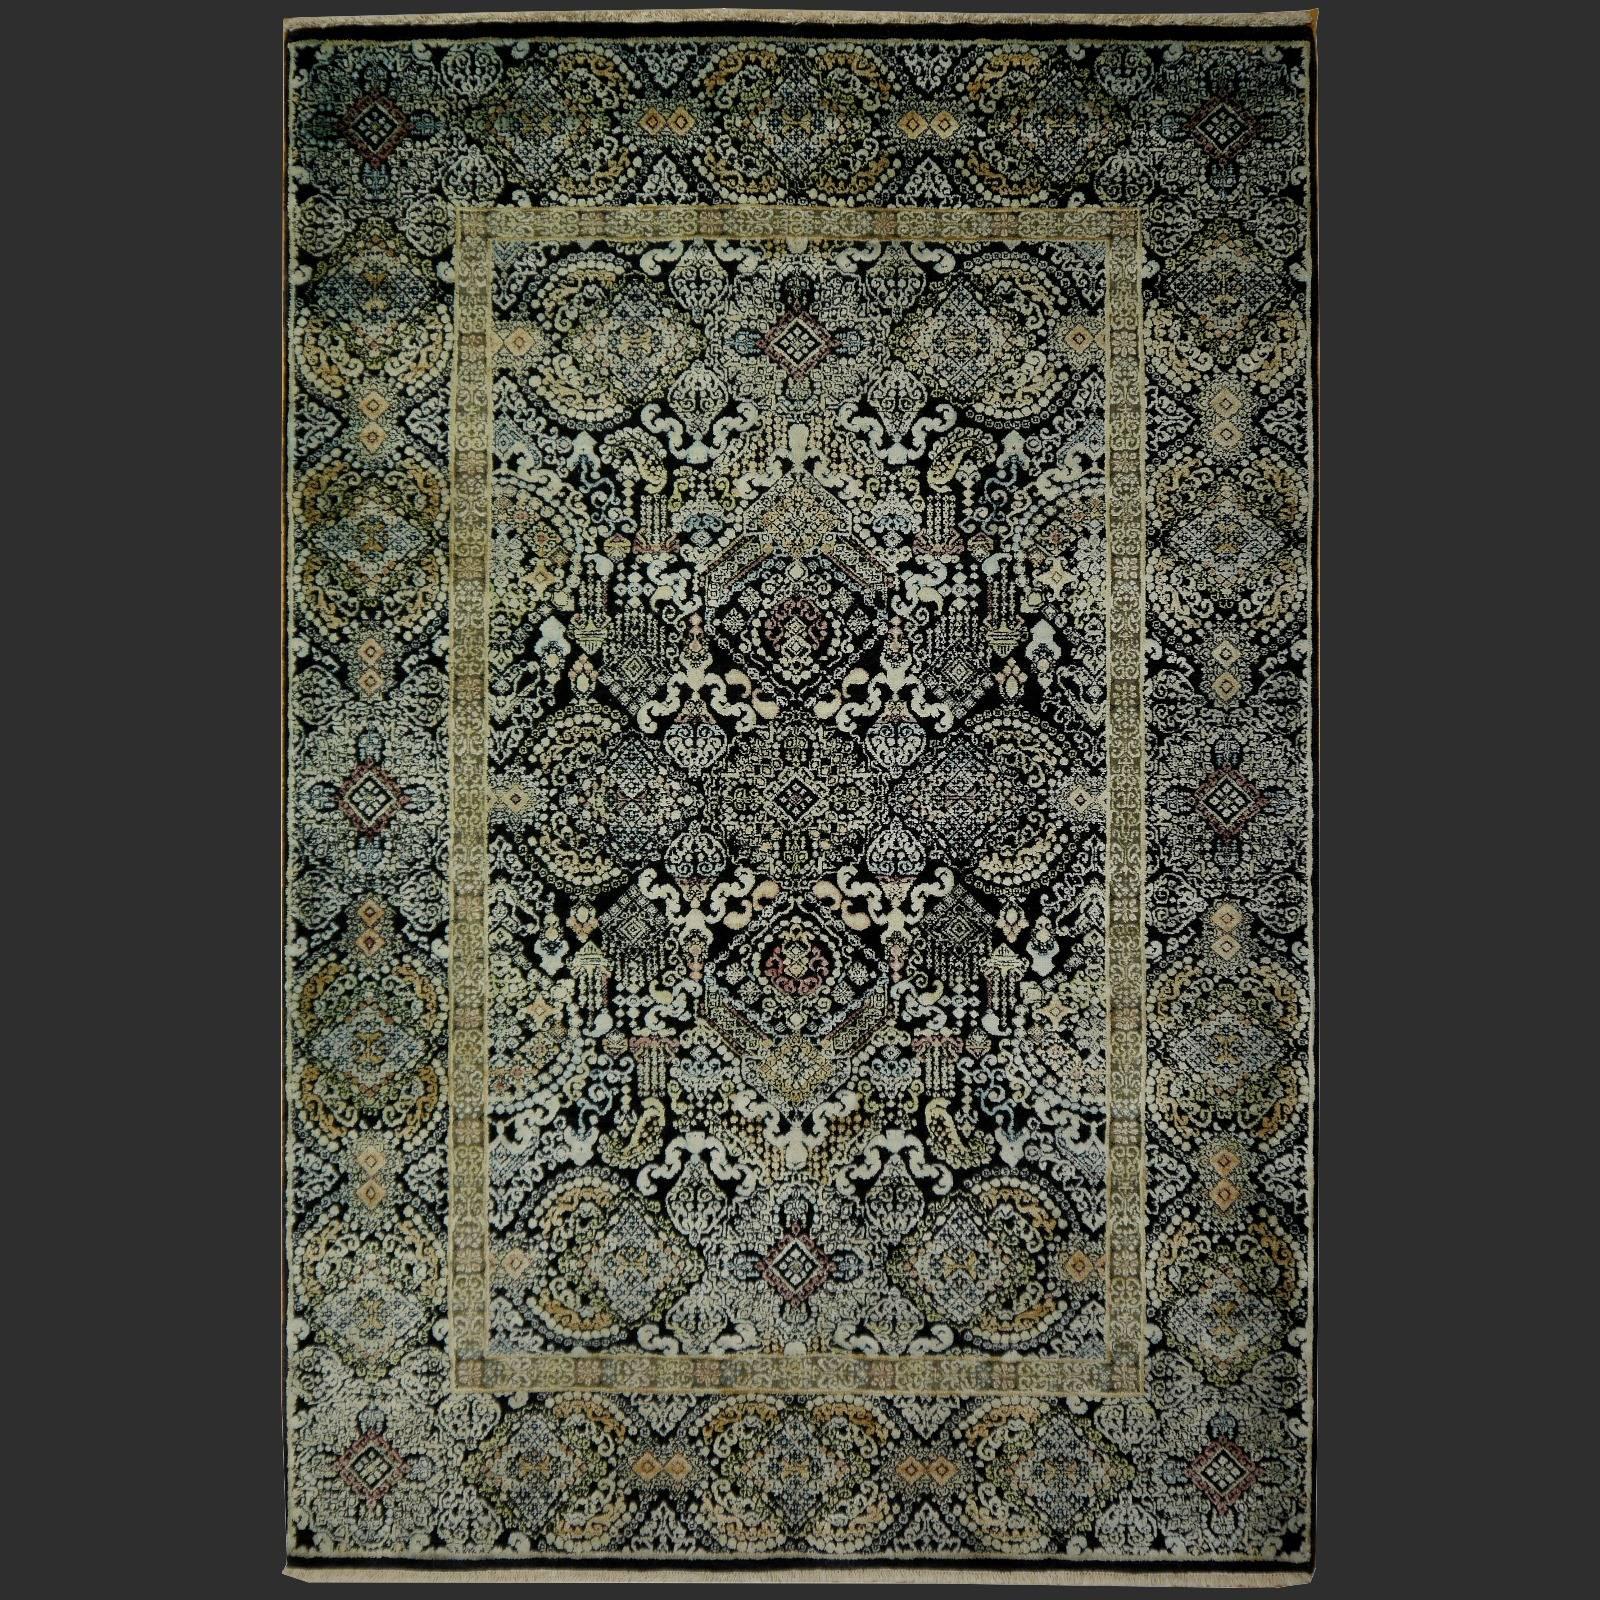 Kohinoor Hand-Knotted Wool and Silk Rug from India Black Gold Green  1